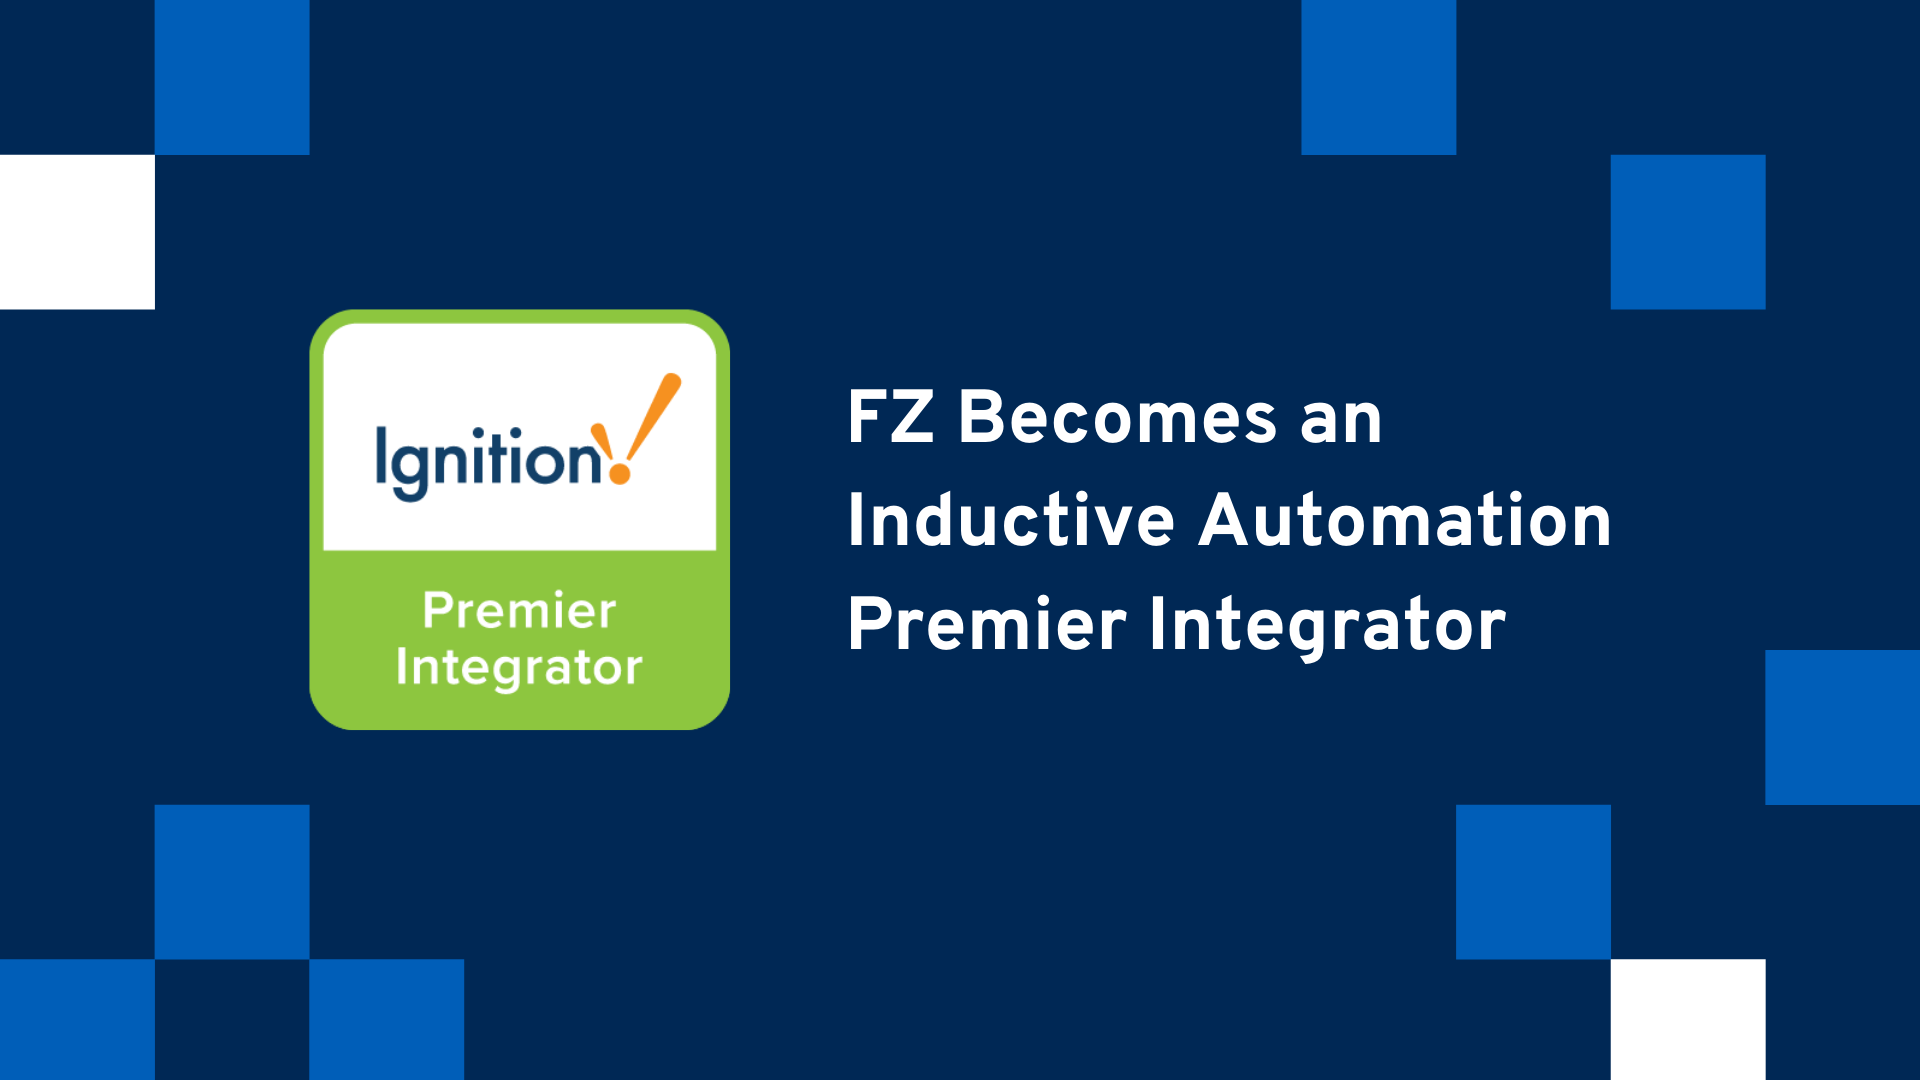 FZ-Becomes-an-Inductive-Automation-Premier-Integrator